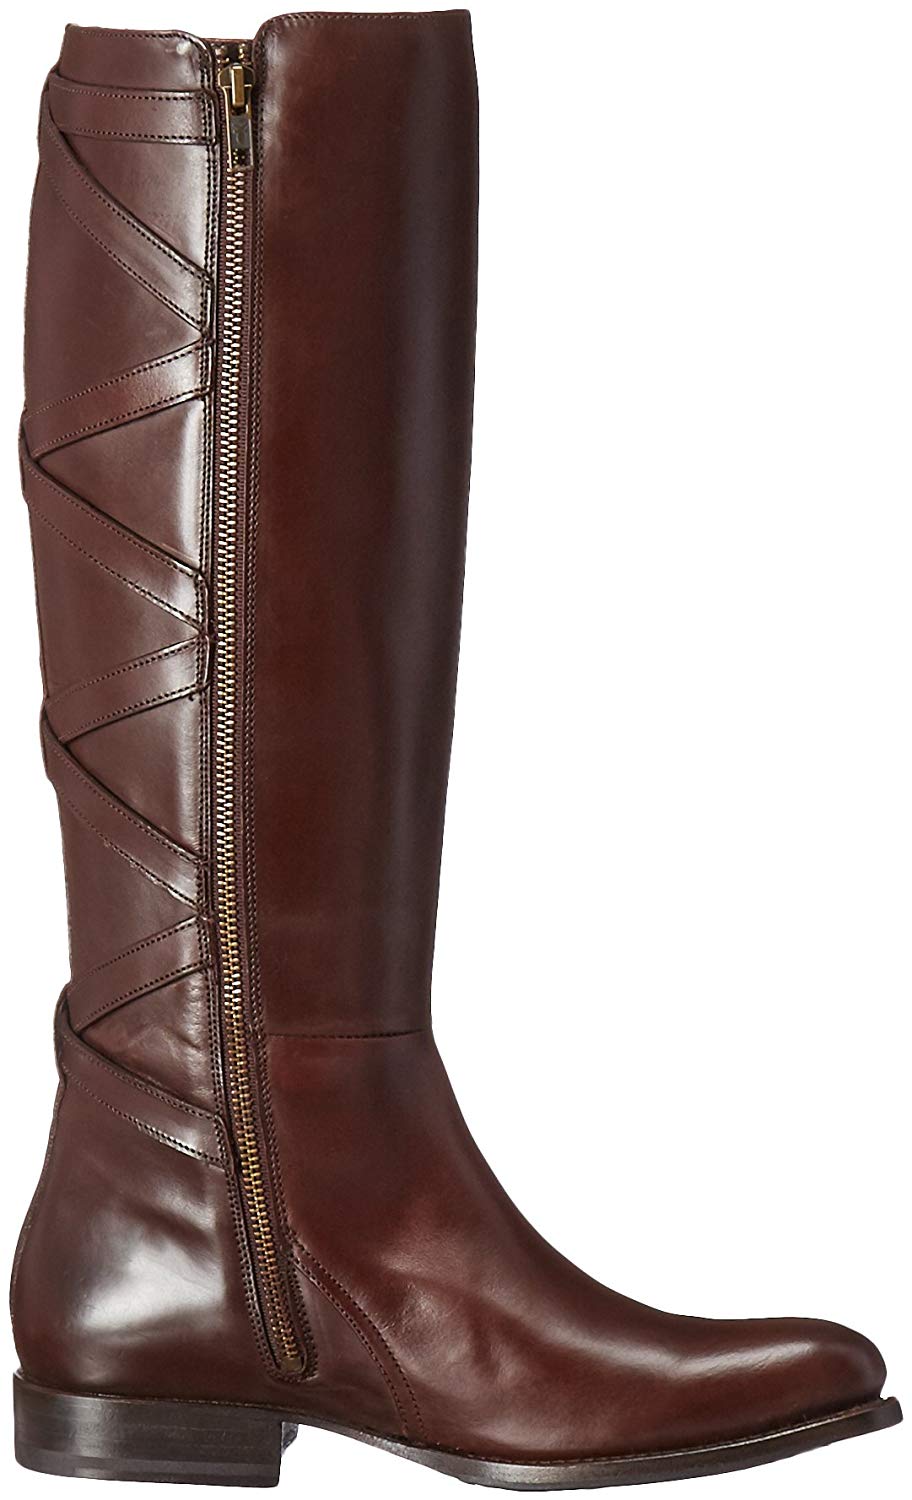 Jordan Strappy Tall Riding Boot Shoes 